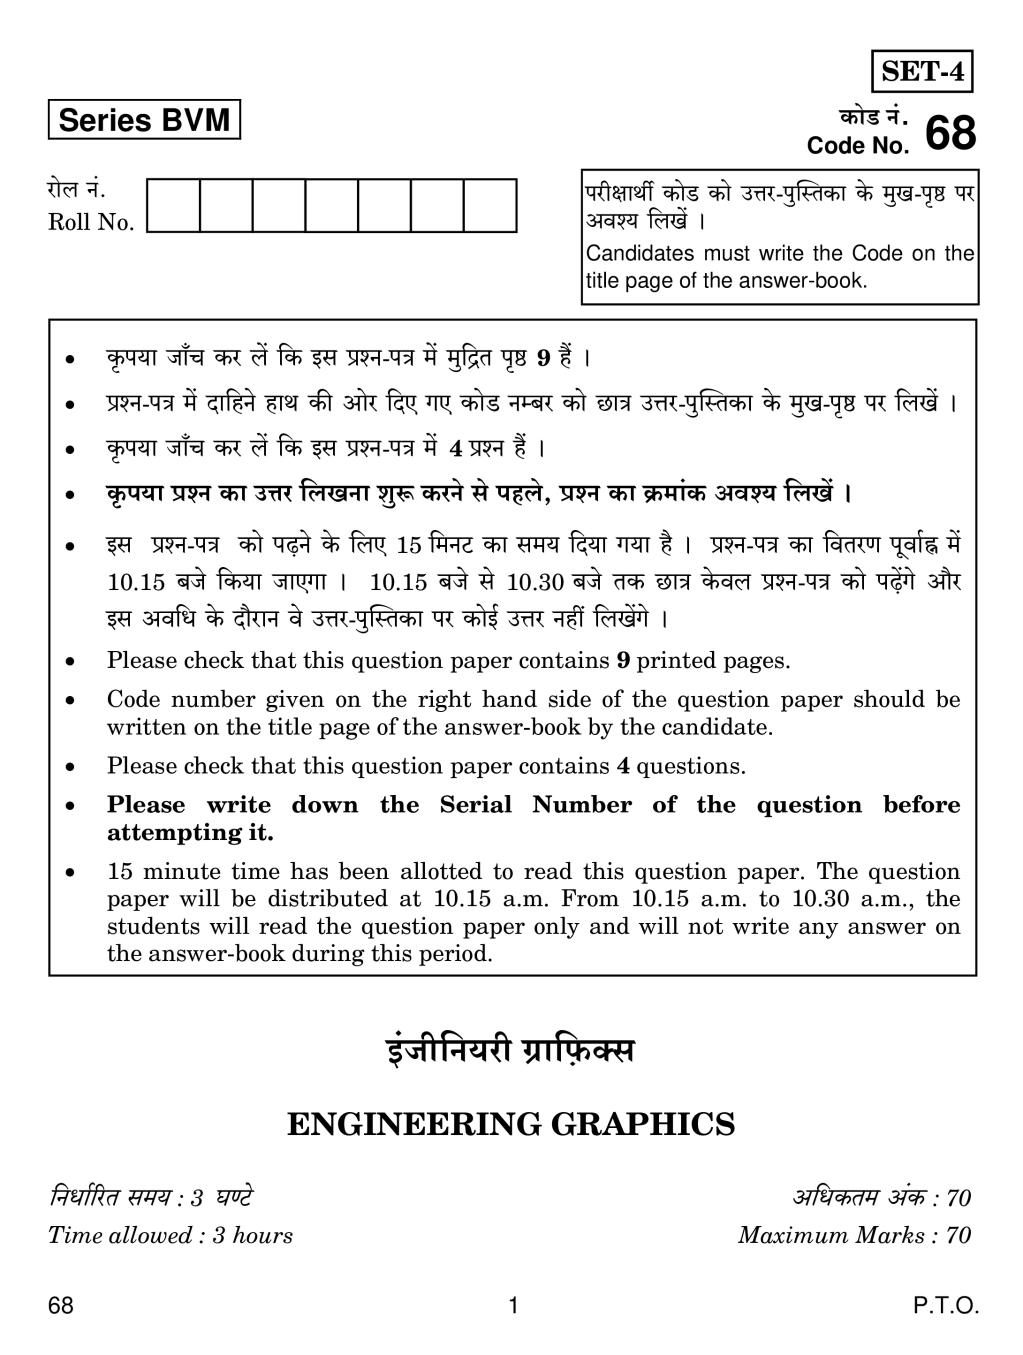 CBSE Class 12 Engineering Graphics Question Paper 2019 - Page 1